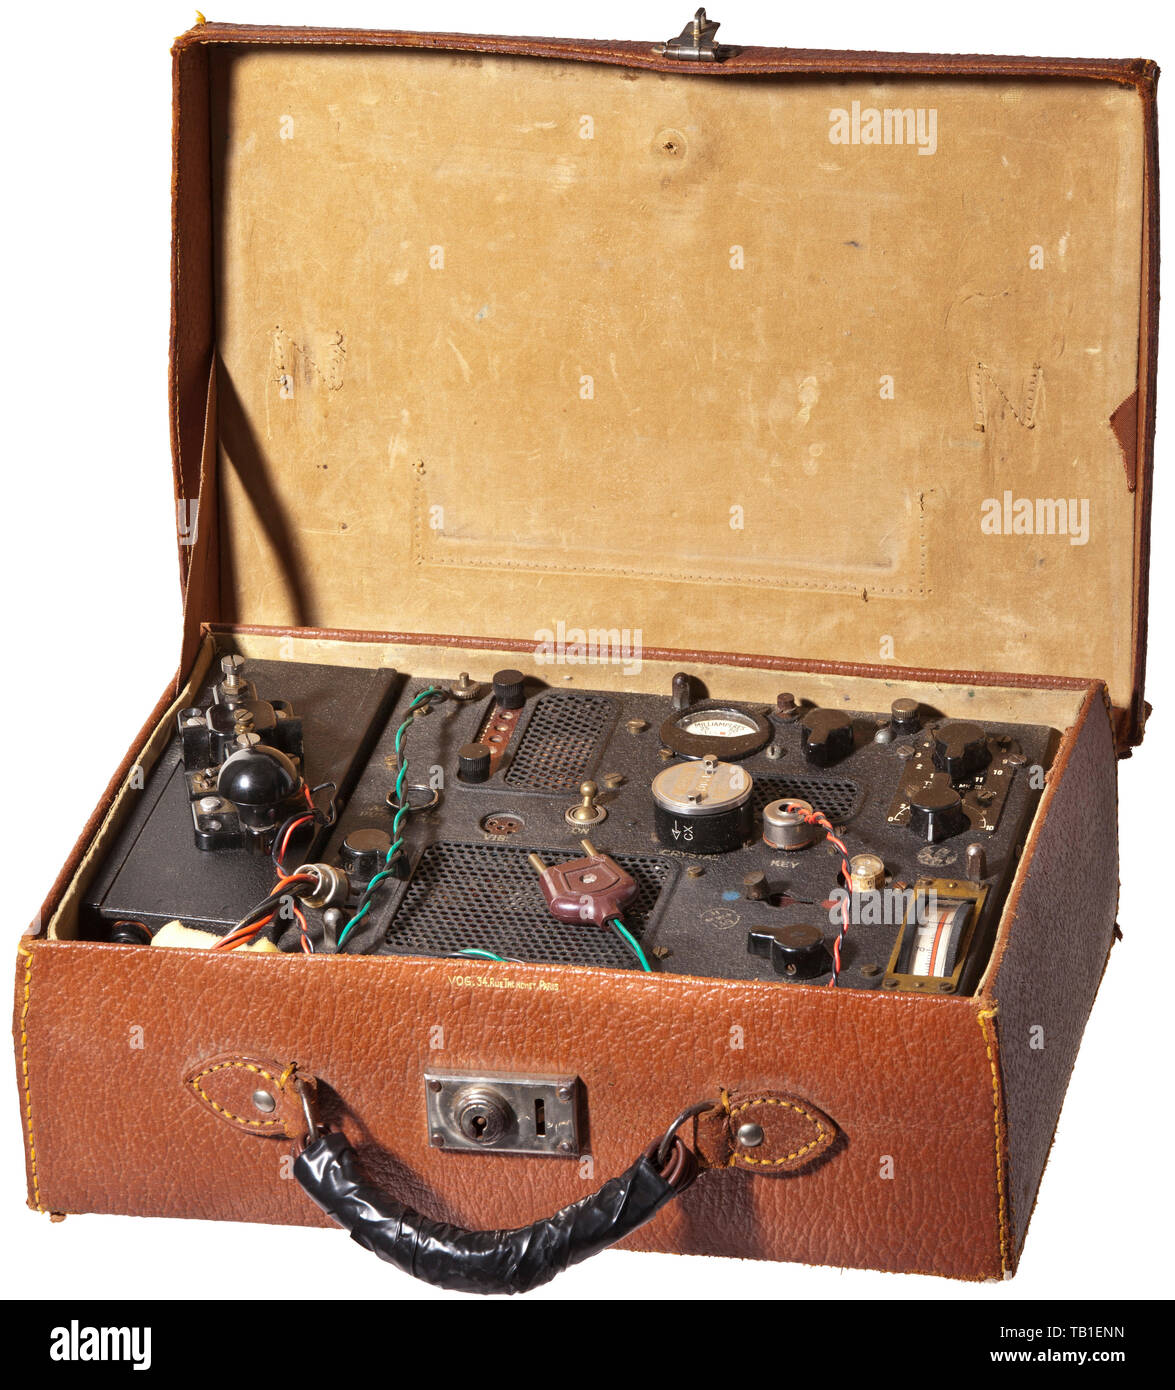 A suitcase radio, type A MK III, Used by the French Resistance during World  War II. Black lacquered modules in metal casing: transceiver, power supply  unit, and telegraph key. Modules are complete